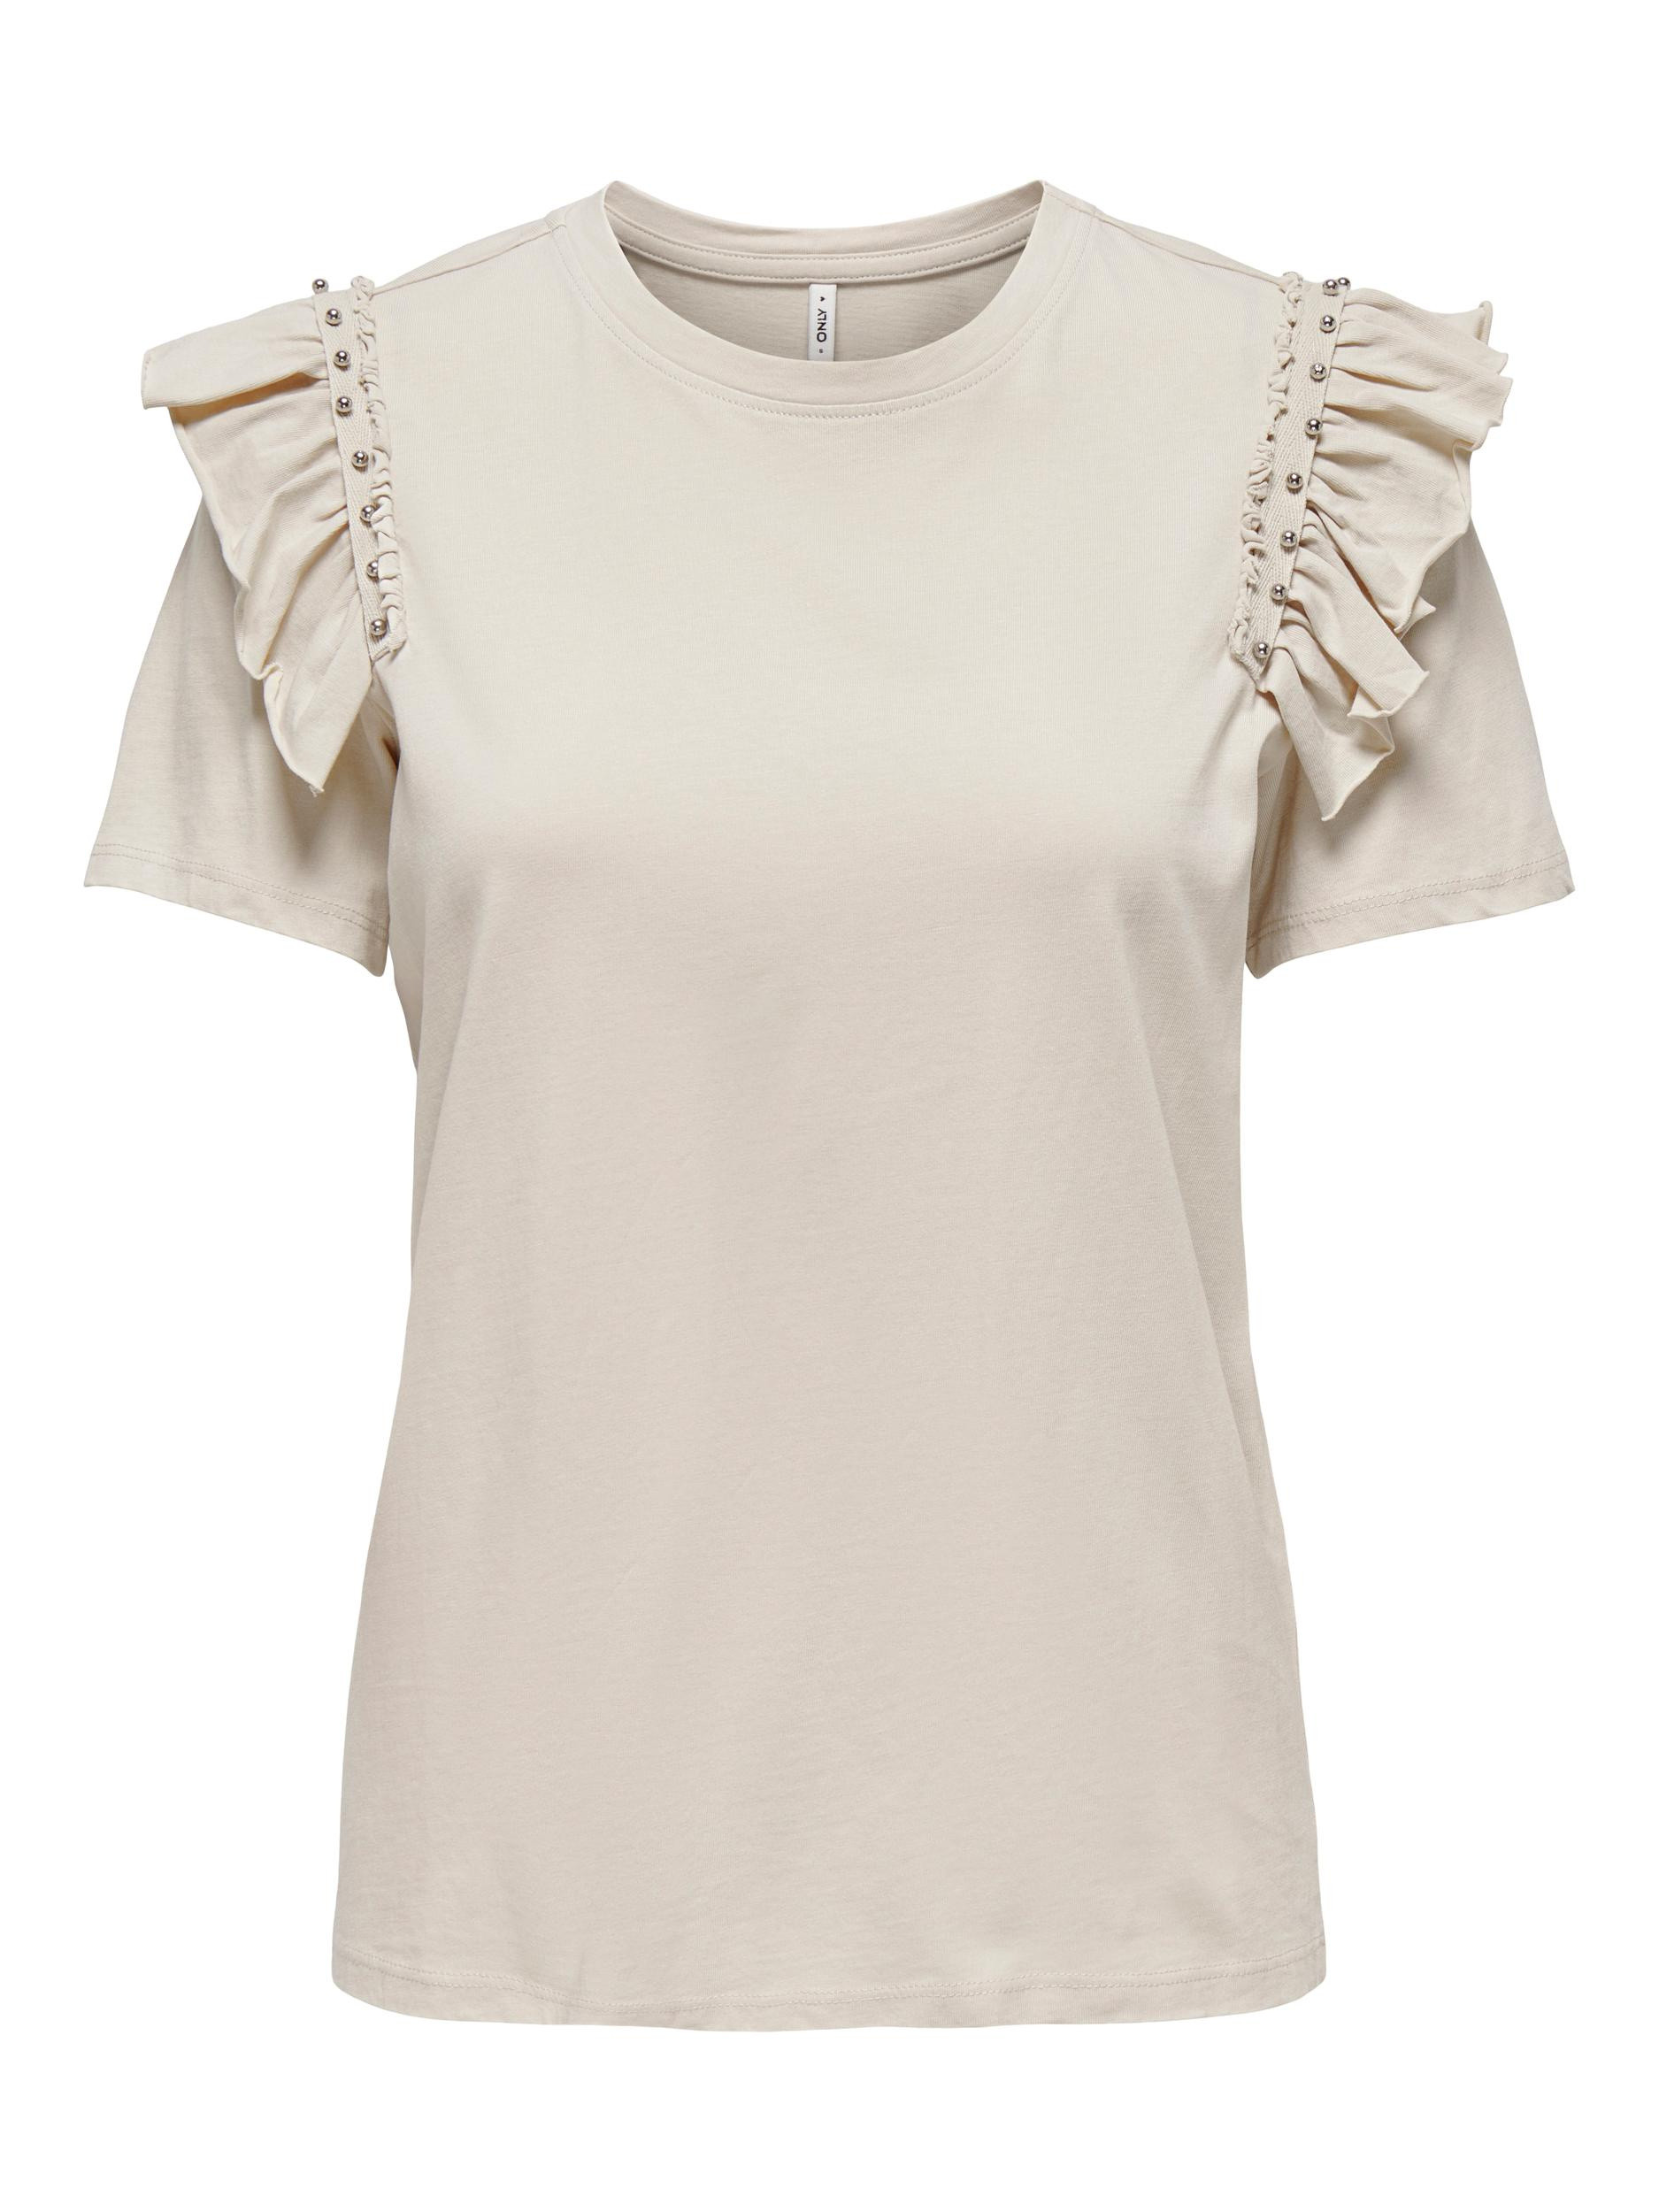 Only - T-shirt regular fit in cotone con volant, Beige, large image number 0